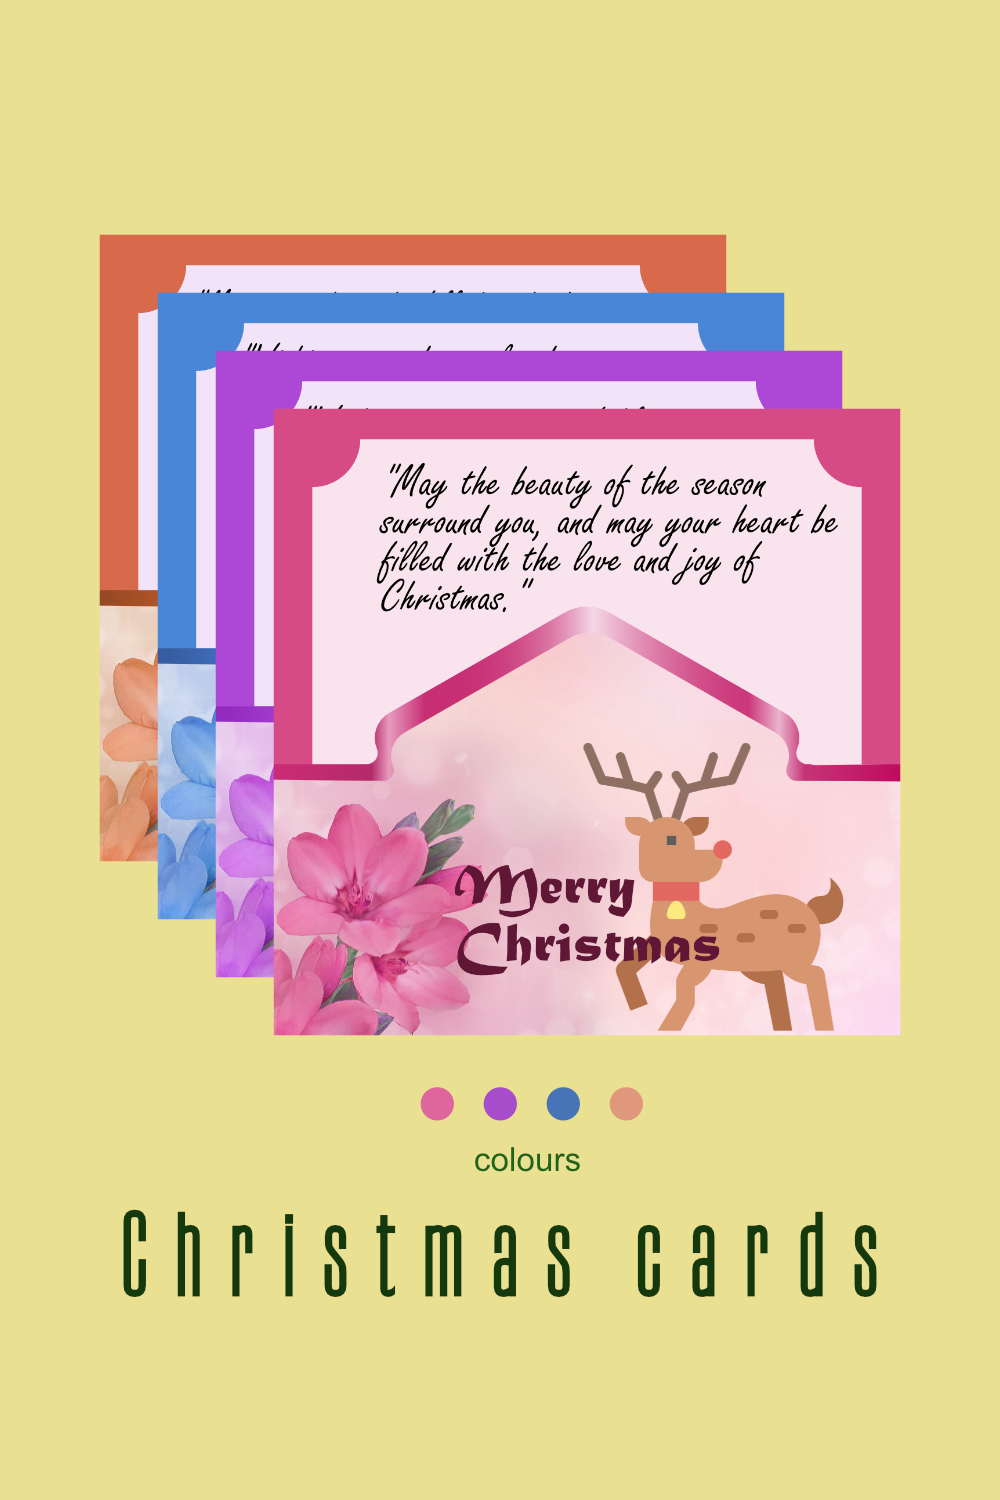 6+ Beautiful Background Christmas Cards with Inspiring Christmas Wishes pinterest preview image.